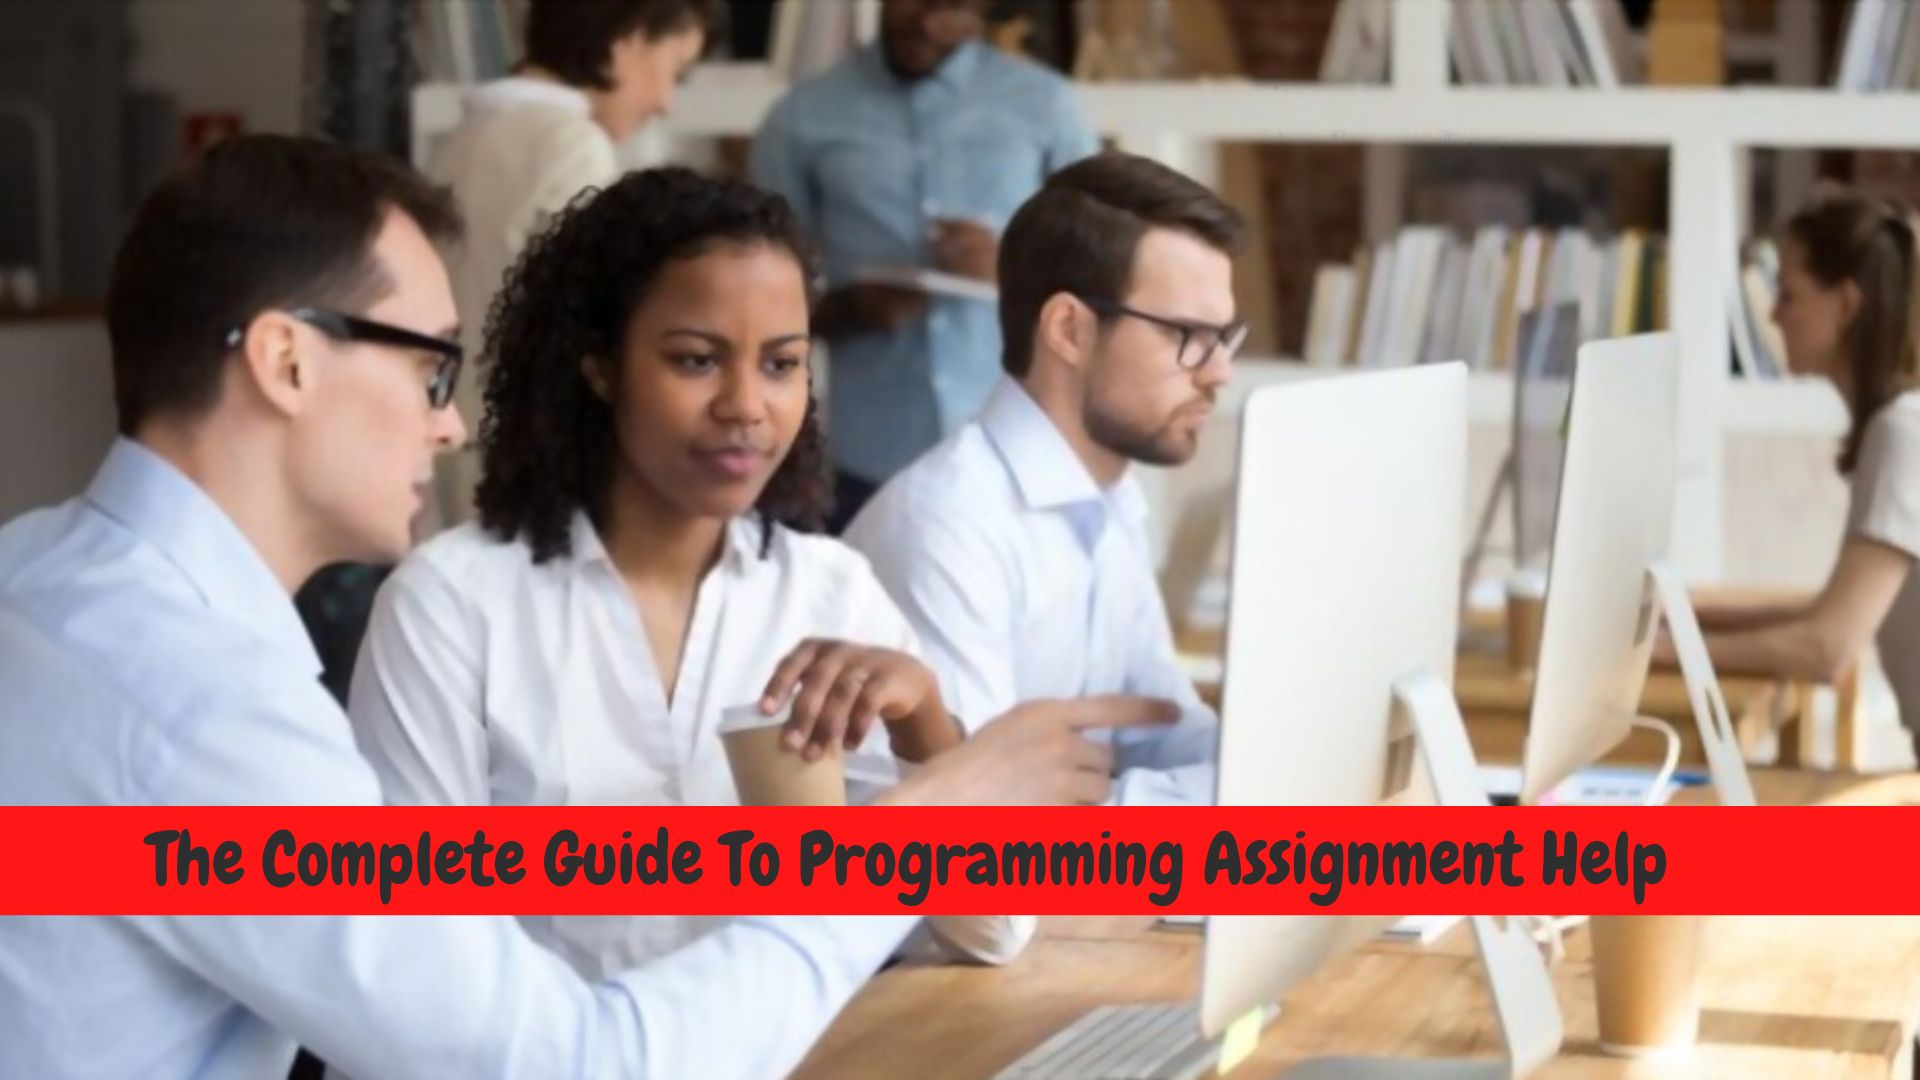 a complete guide to programming assignment help